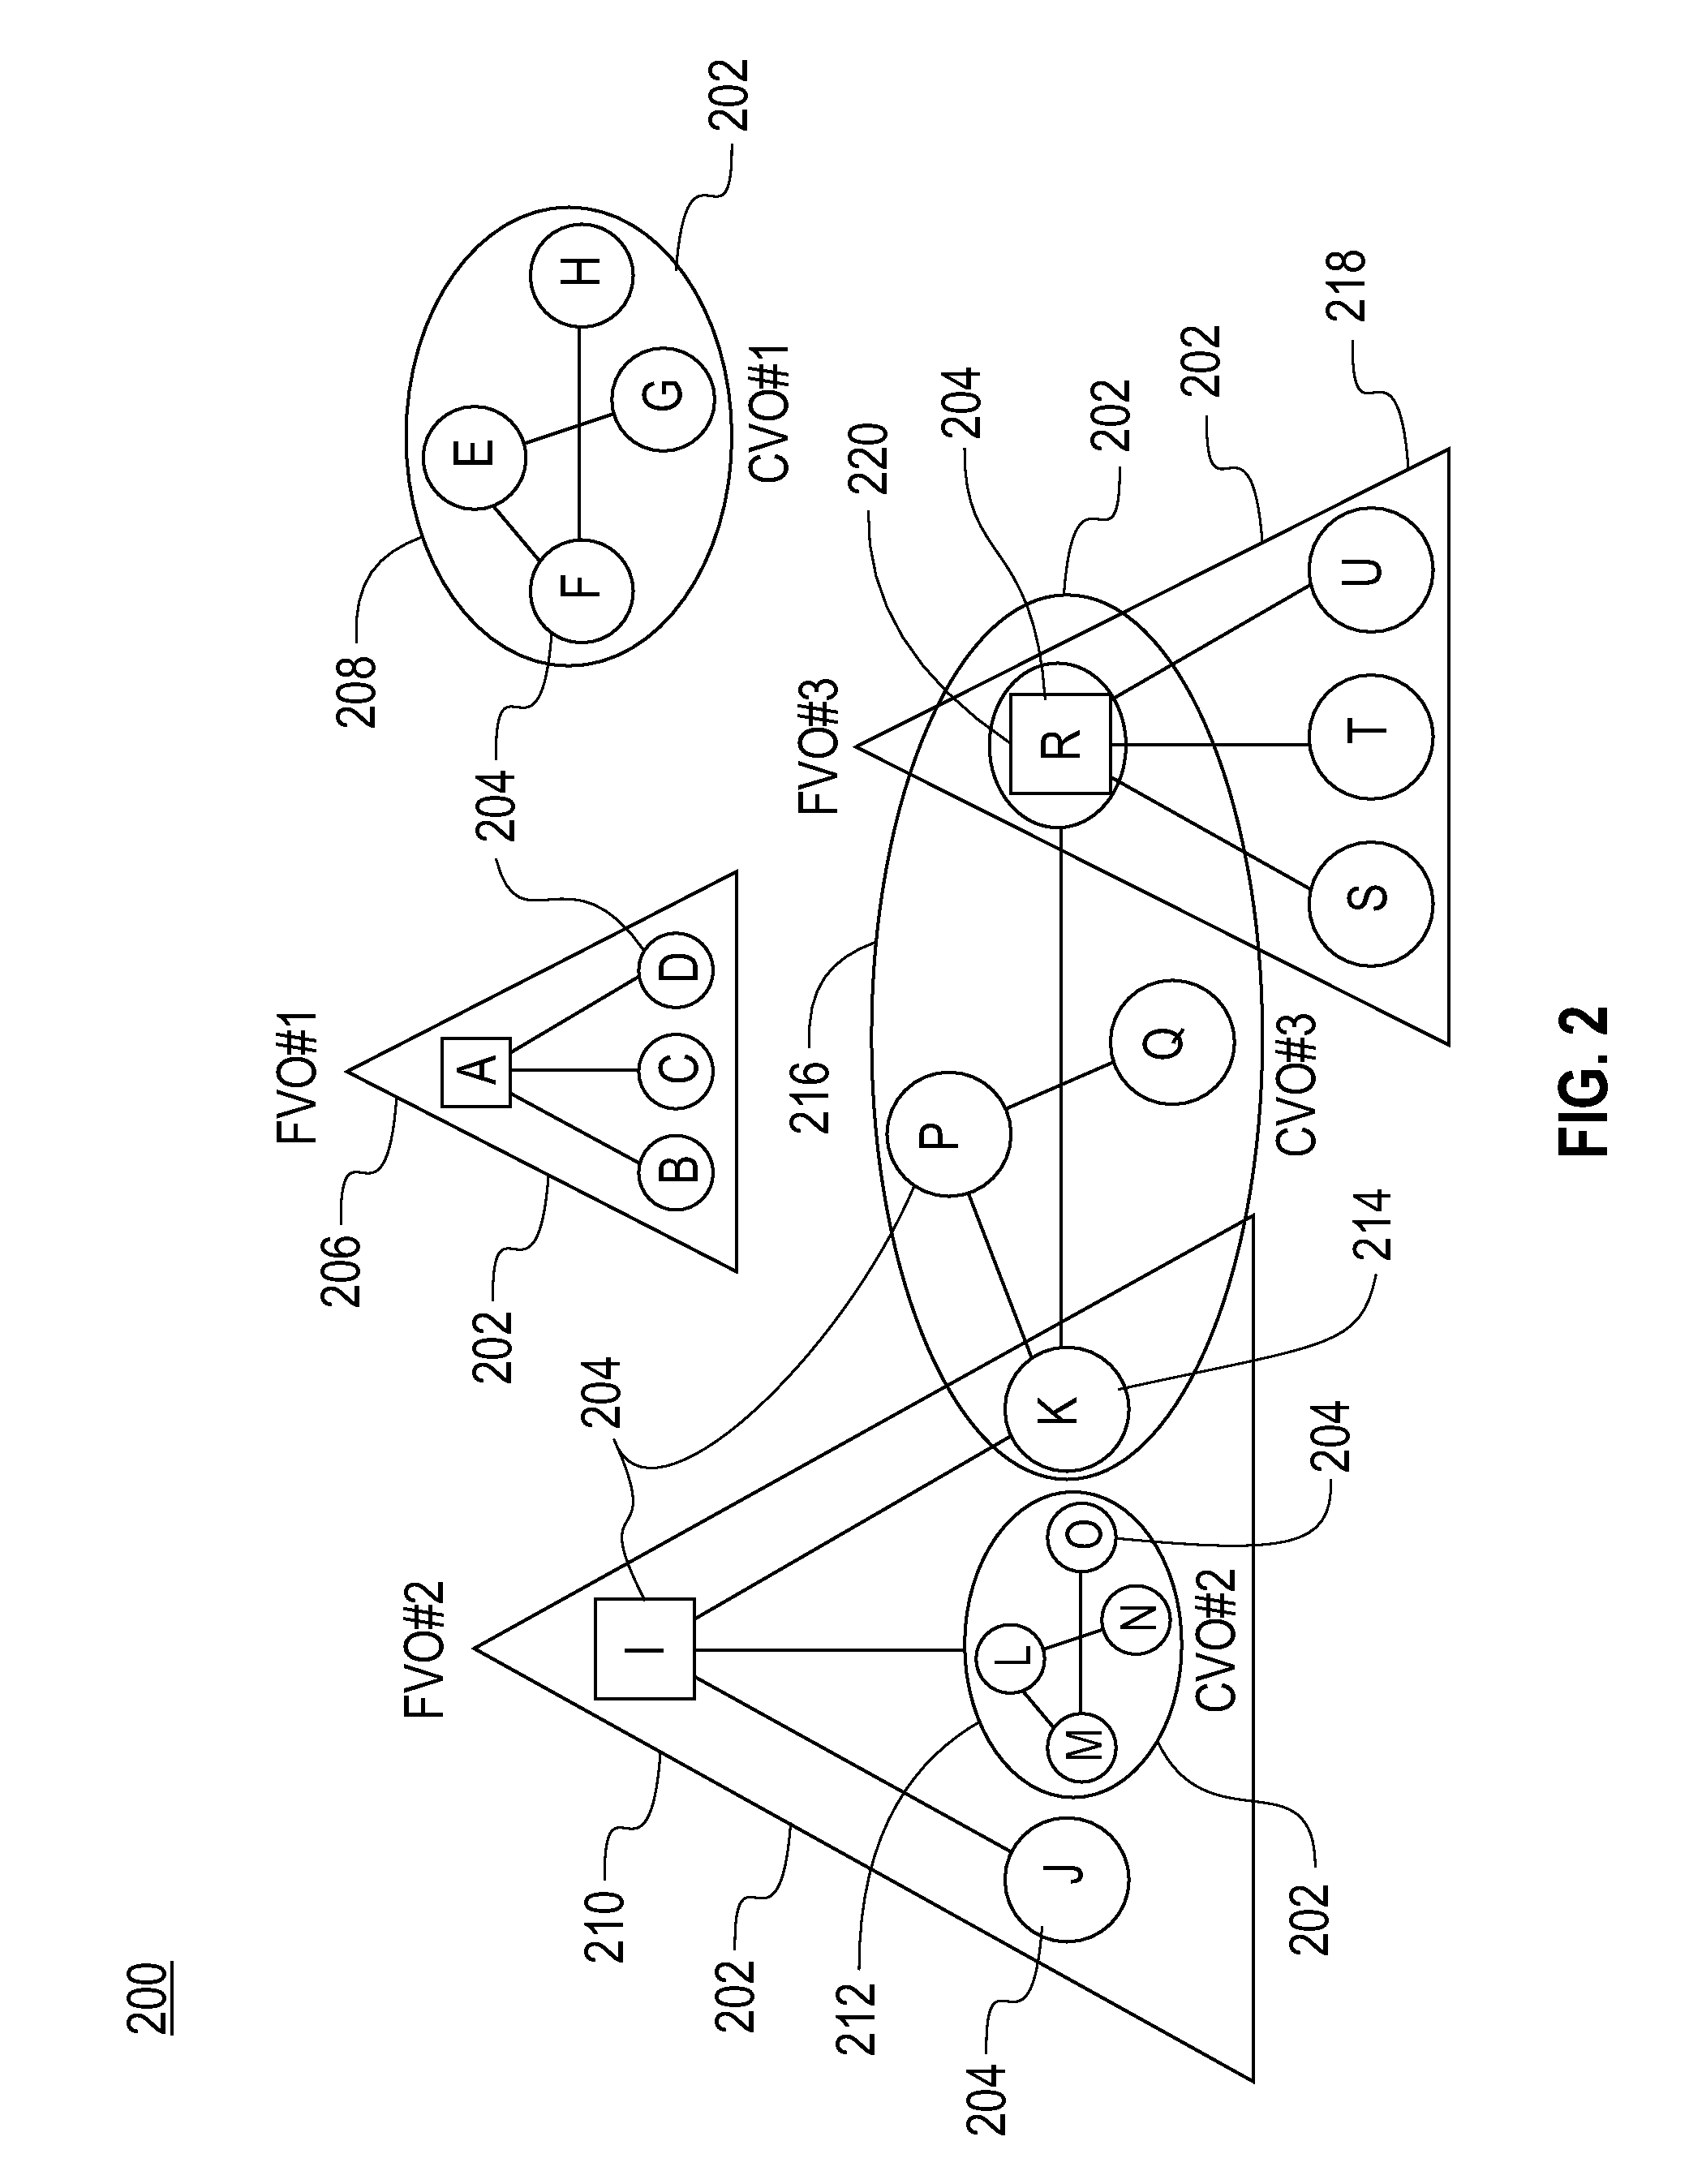 System and Method of Planning for Cooperative Information Processing